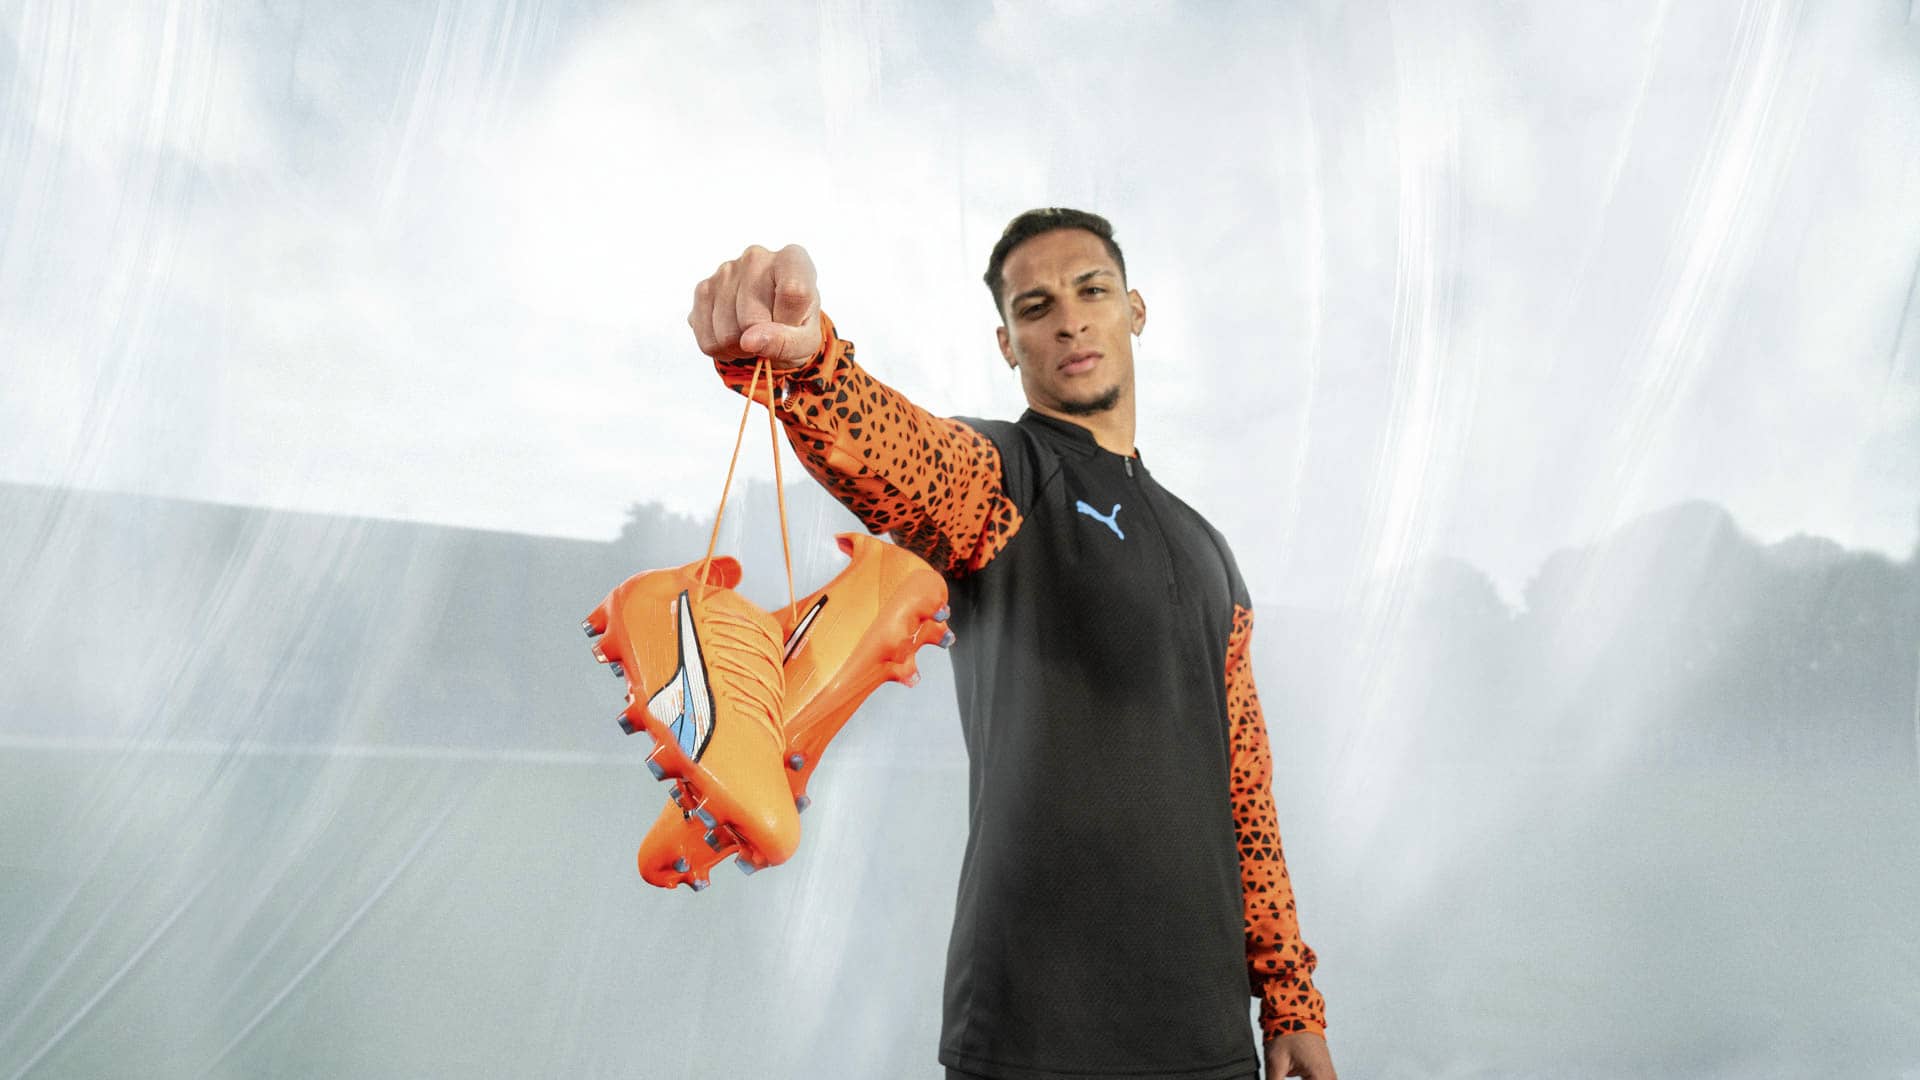 Footballer holds puma ultra supercharge edition in the air by laces